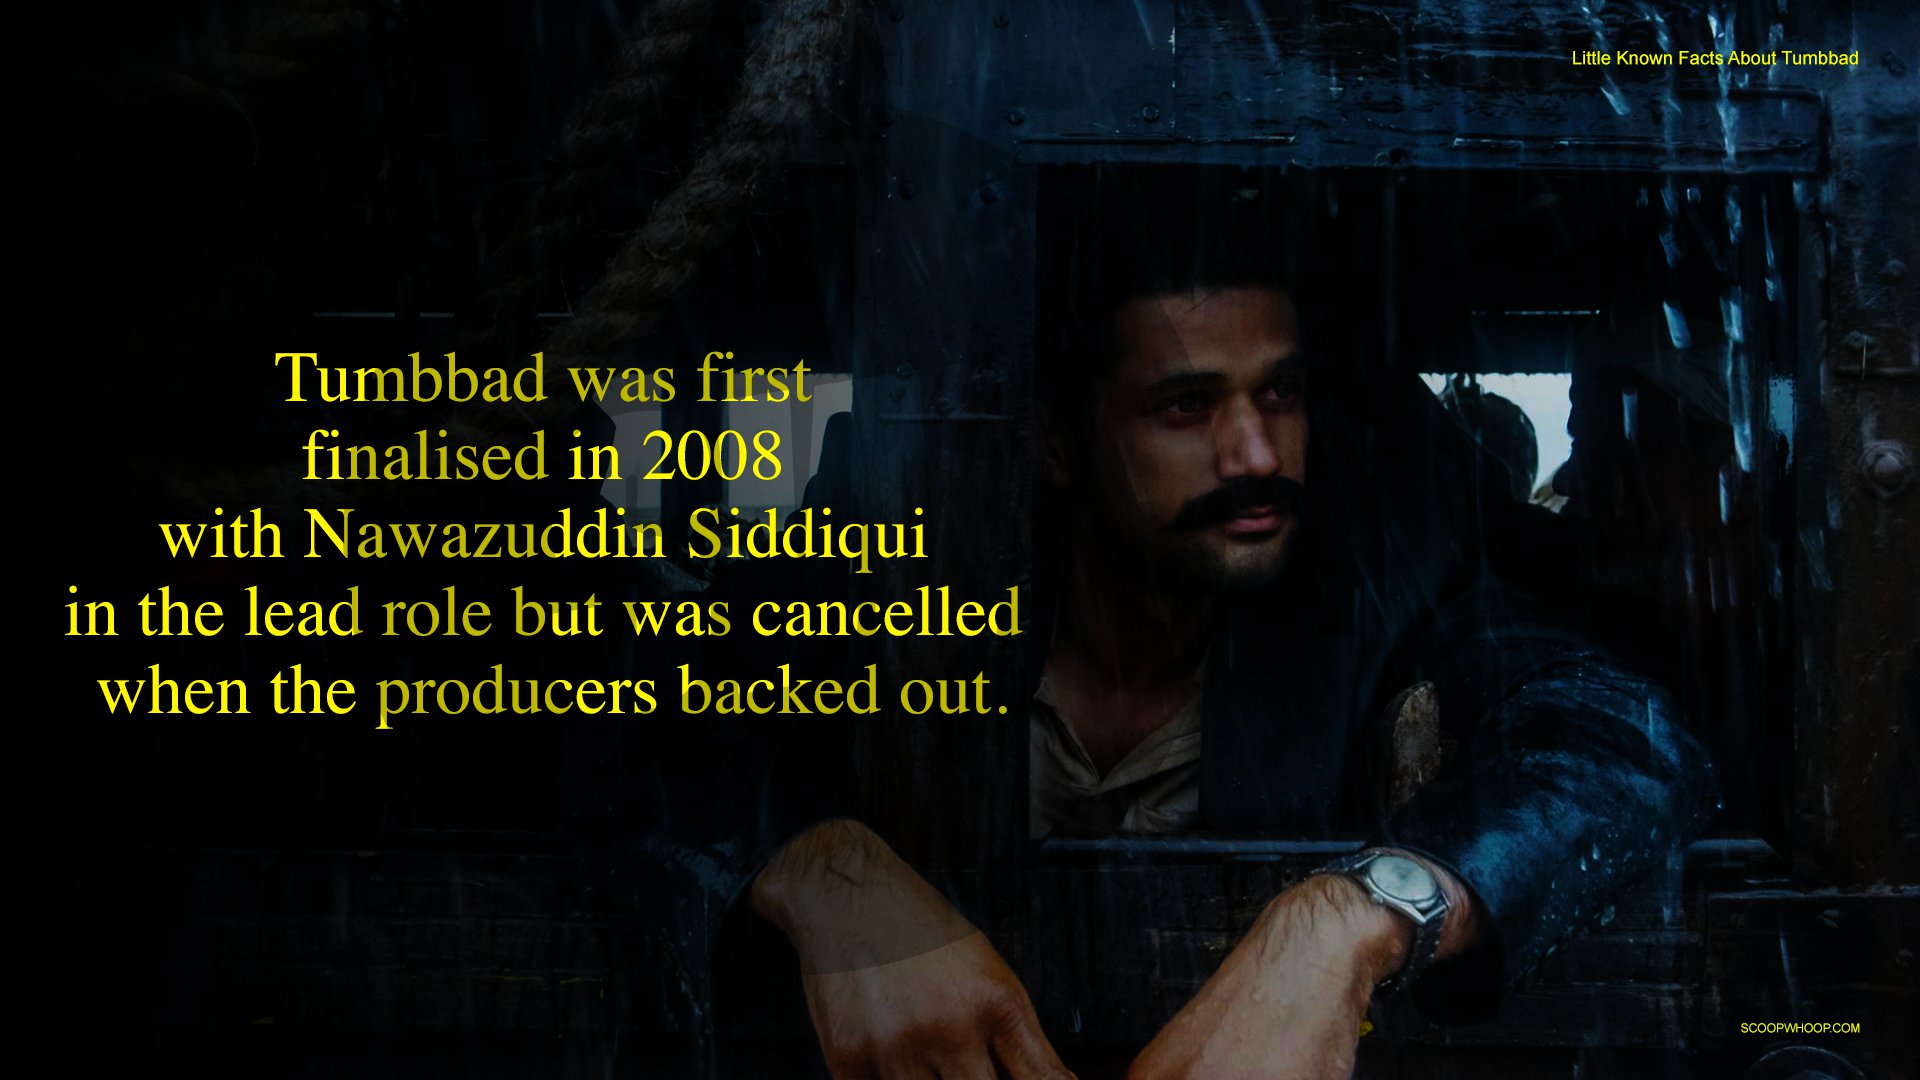 15 Little Known Facts About ‘Tumbbad’ That Will Make You Love The Film Even More 12